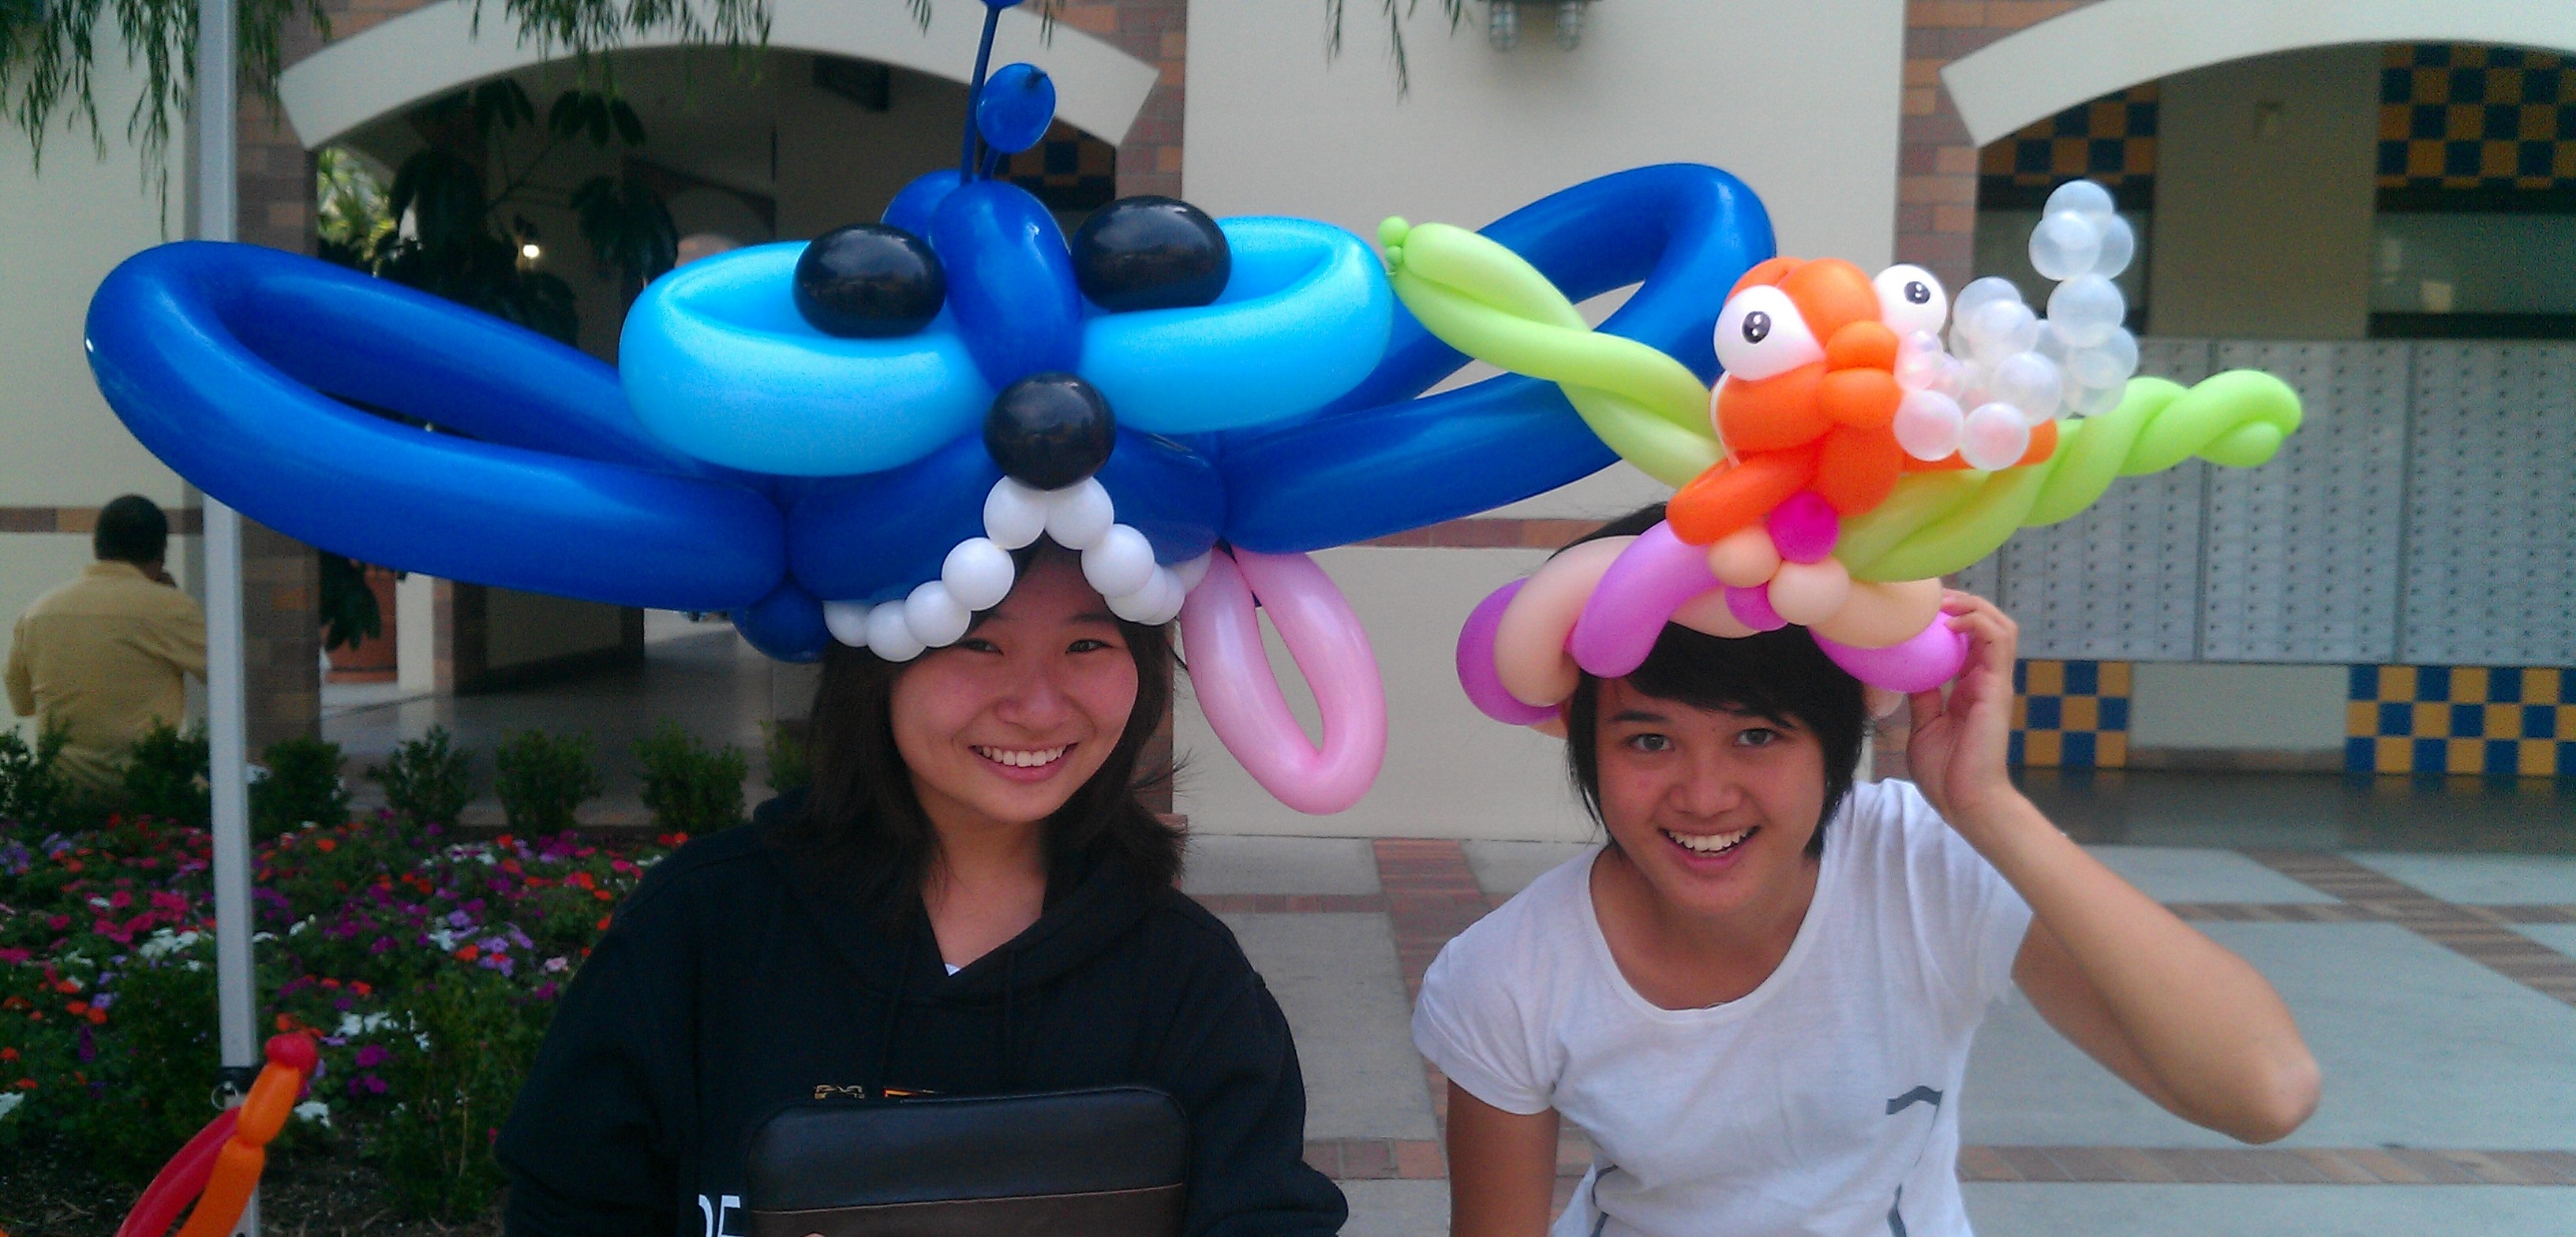 Grand Terrace balloon animals for parties